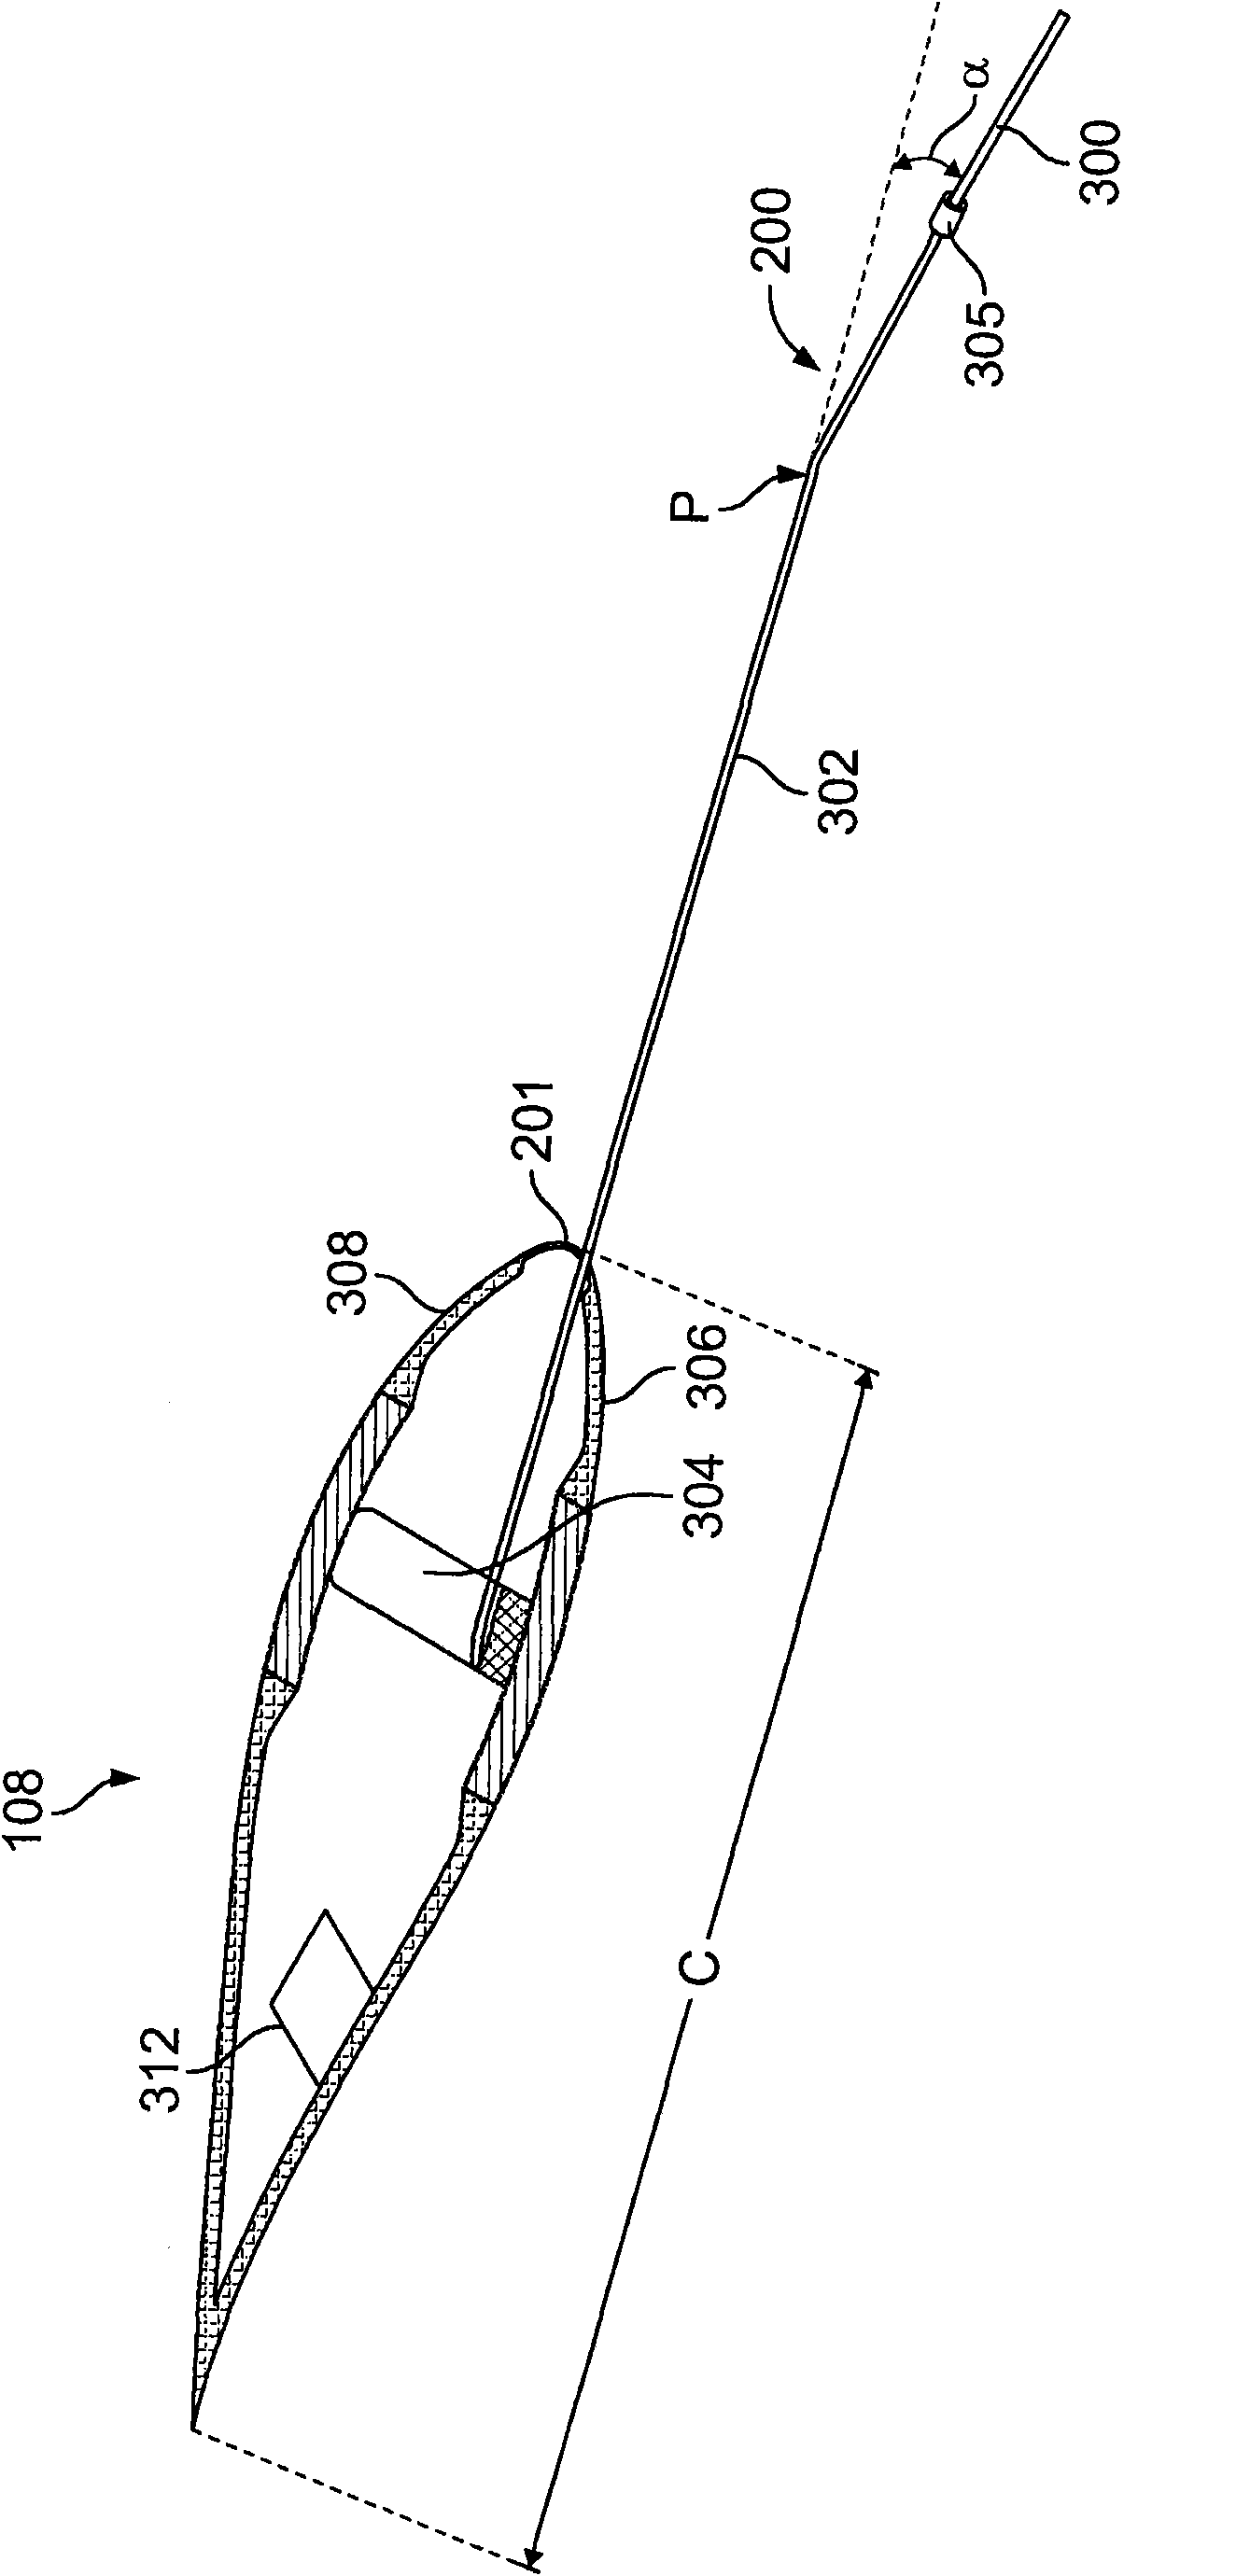 System for the monitoring of the wind incidence angle and the control of the wind turbine